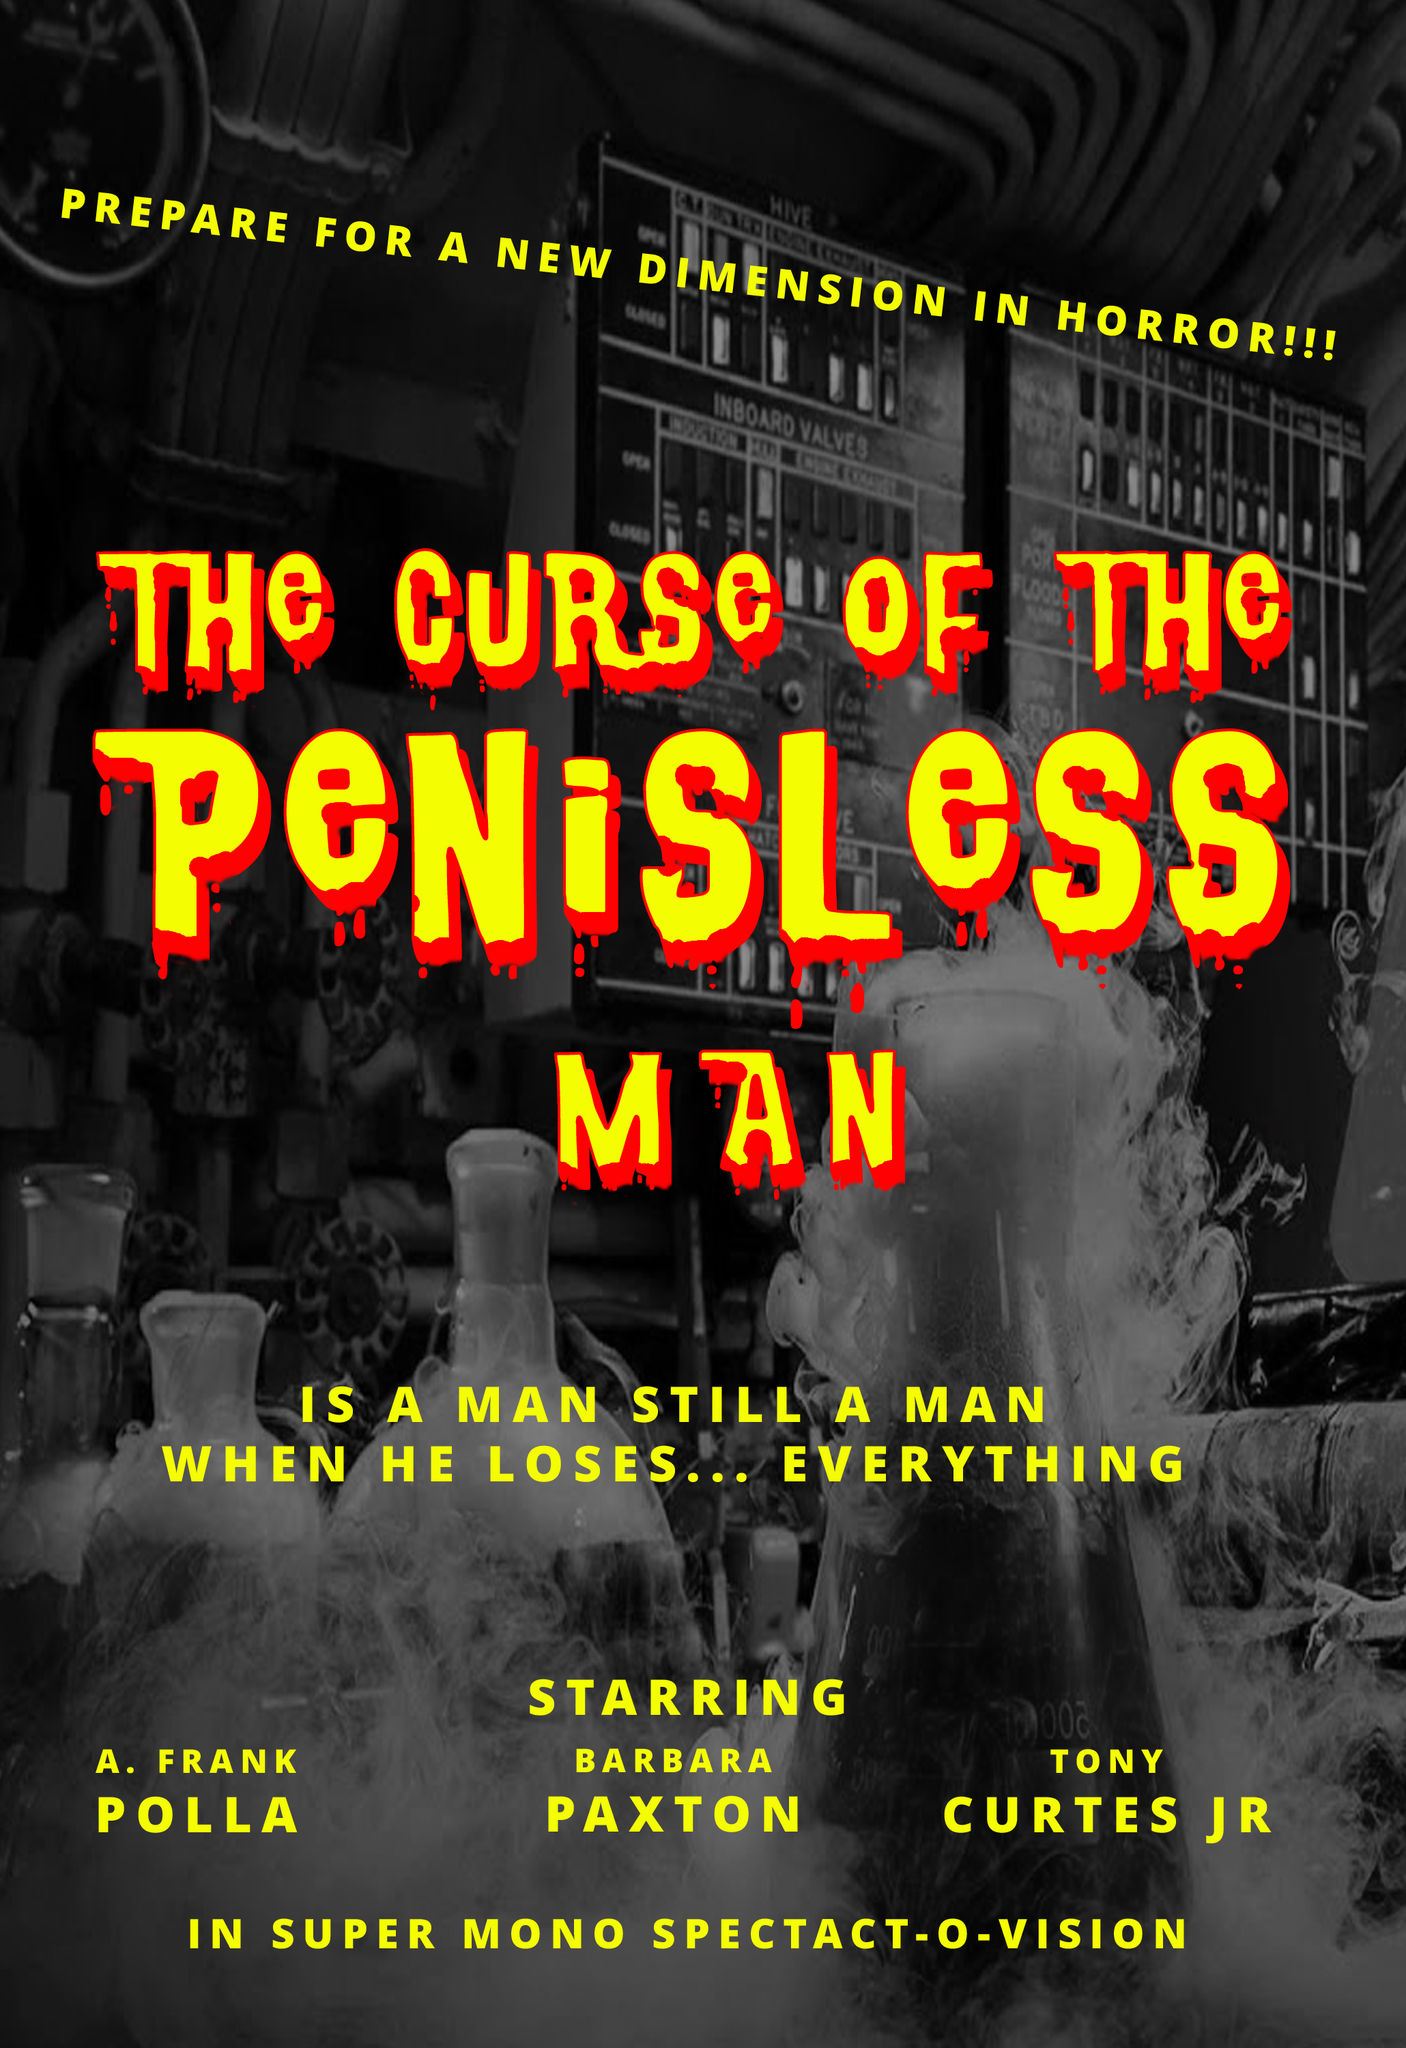 THE CURSE OF THE PENISLESS MAN